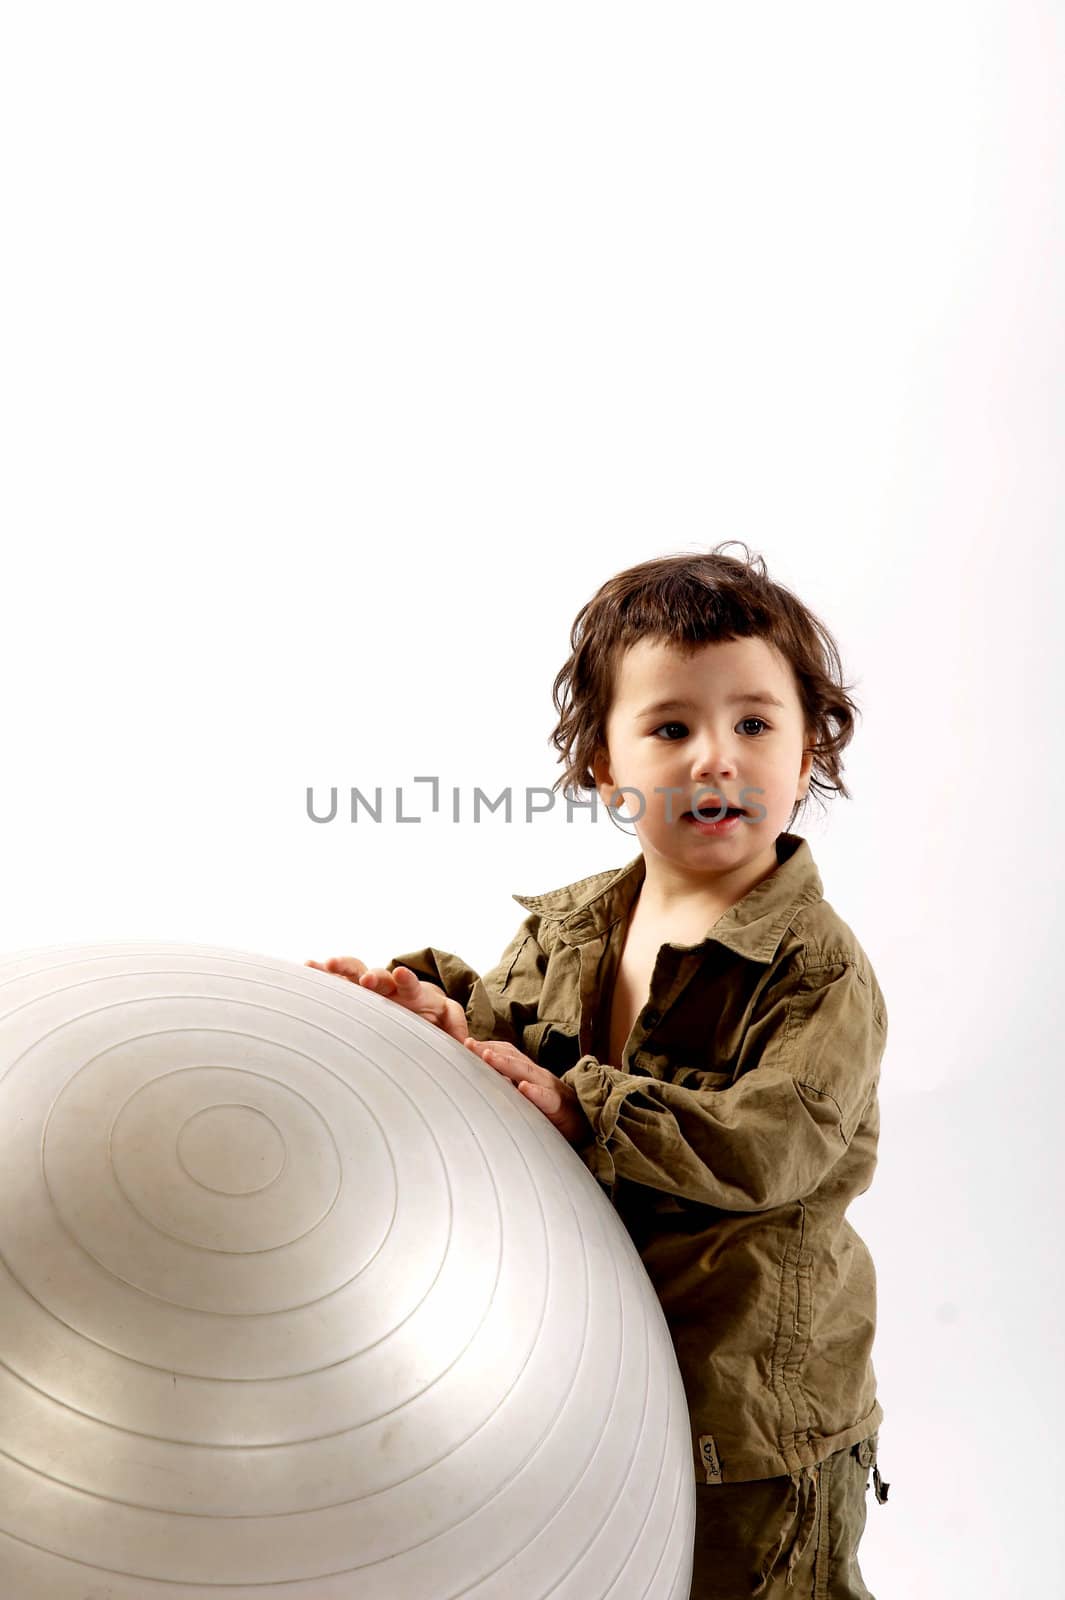 Little boy plays with a big silver ball in photo studio